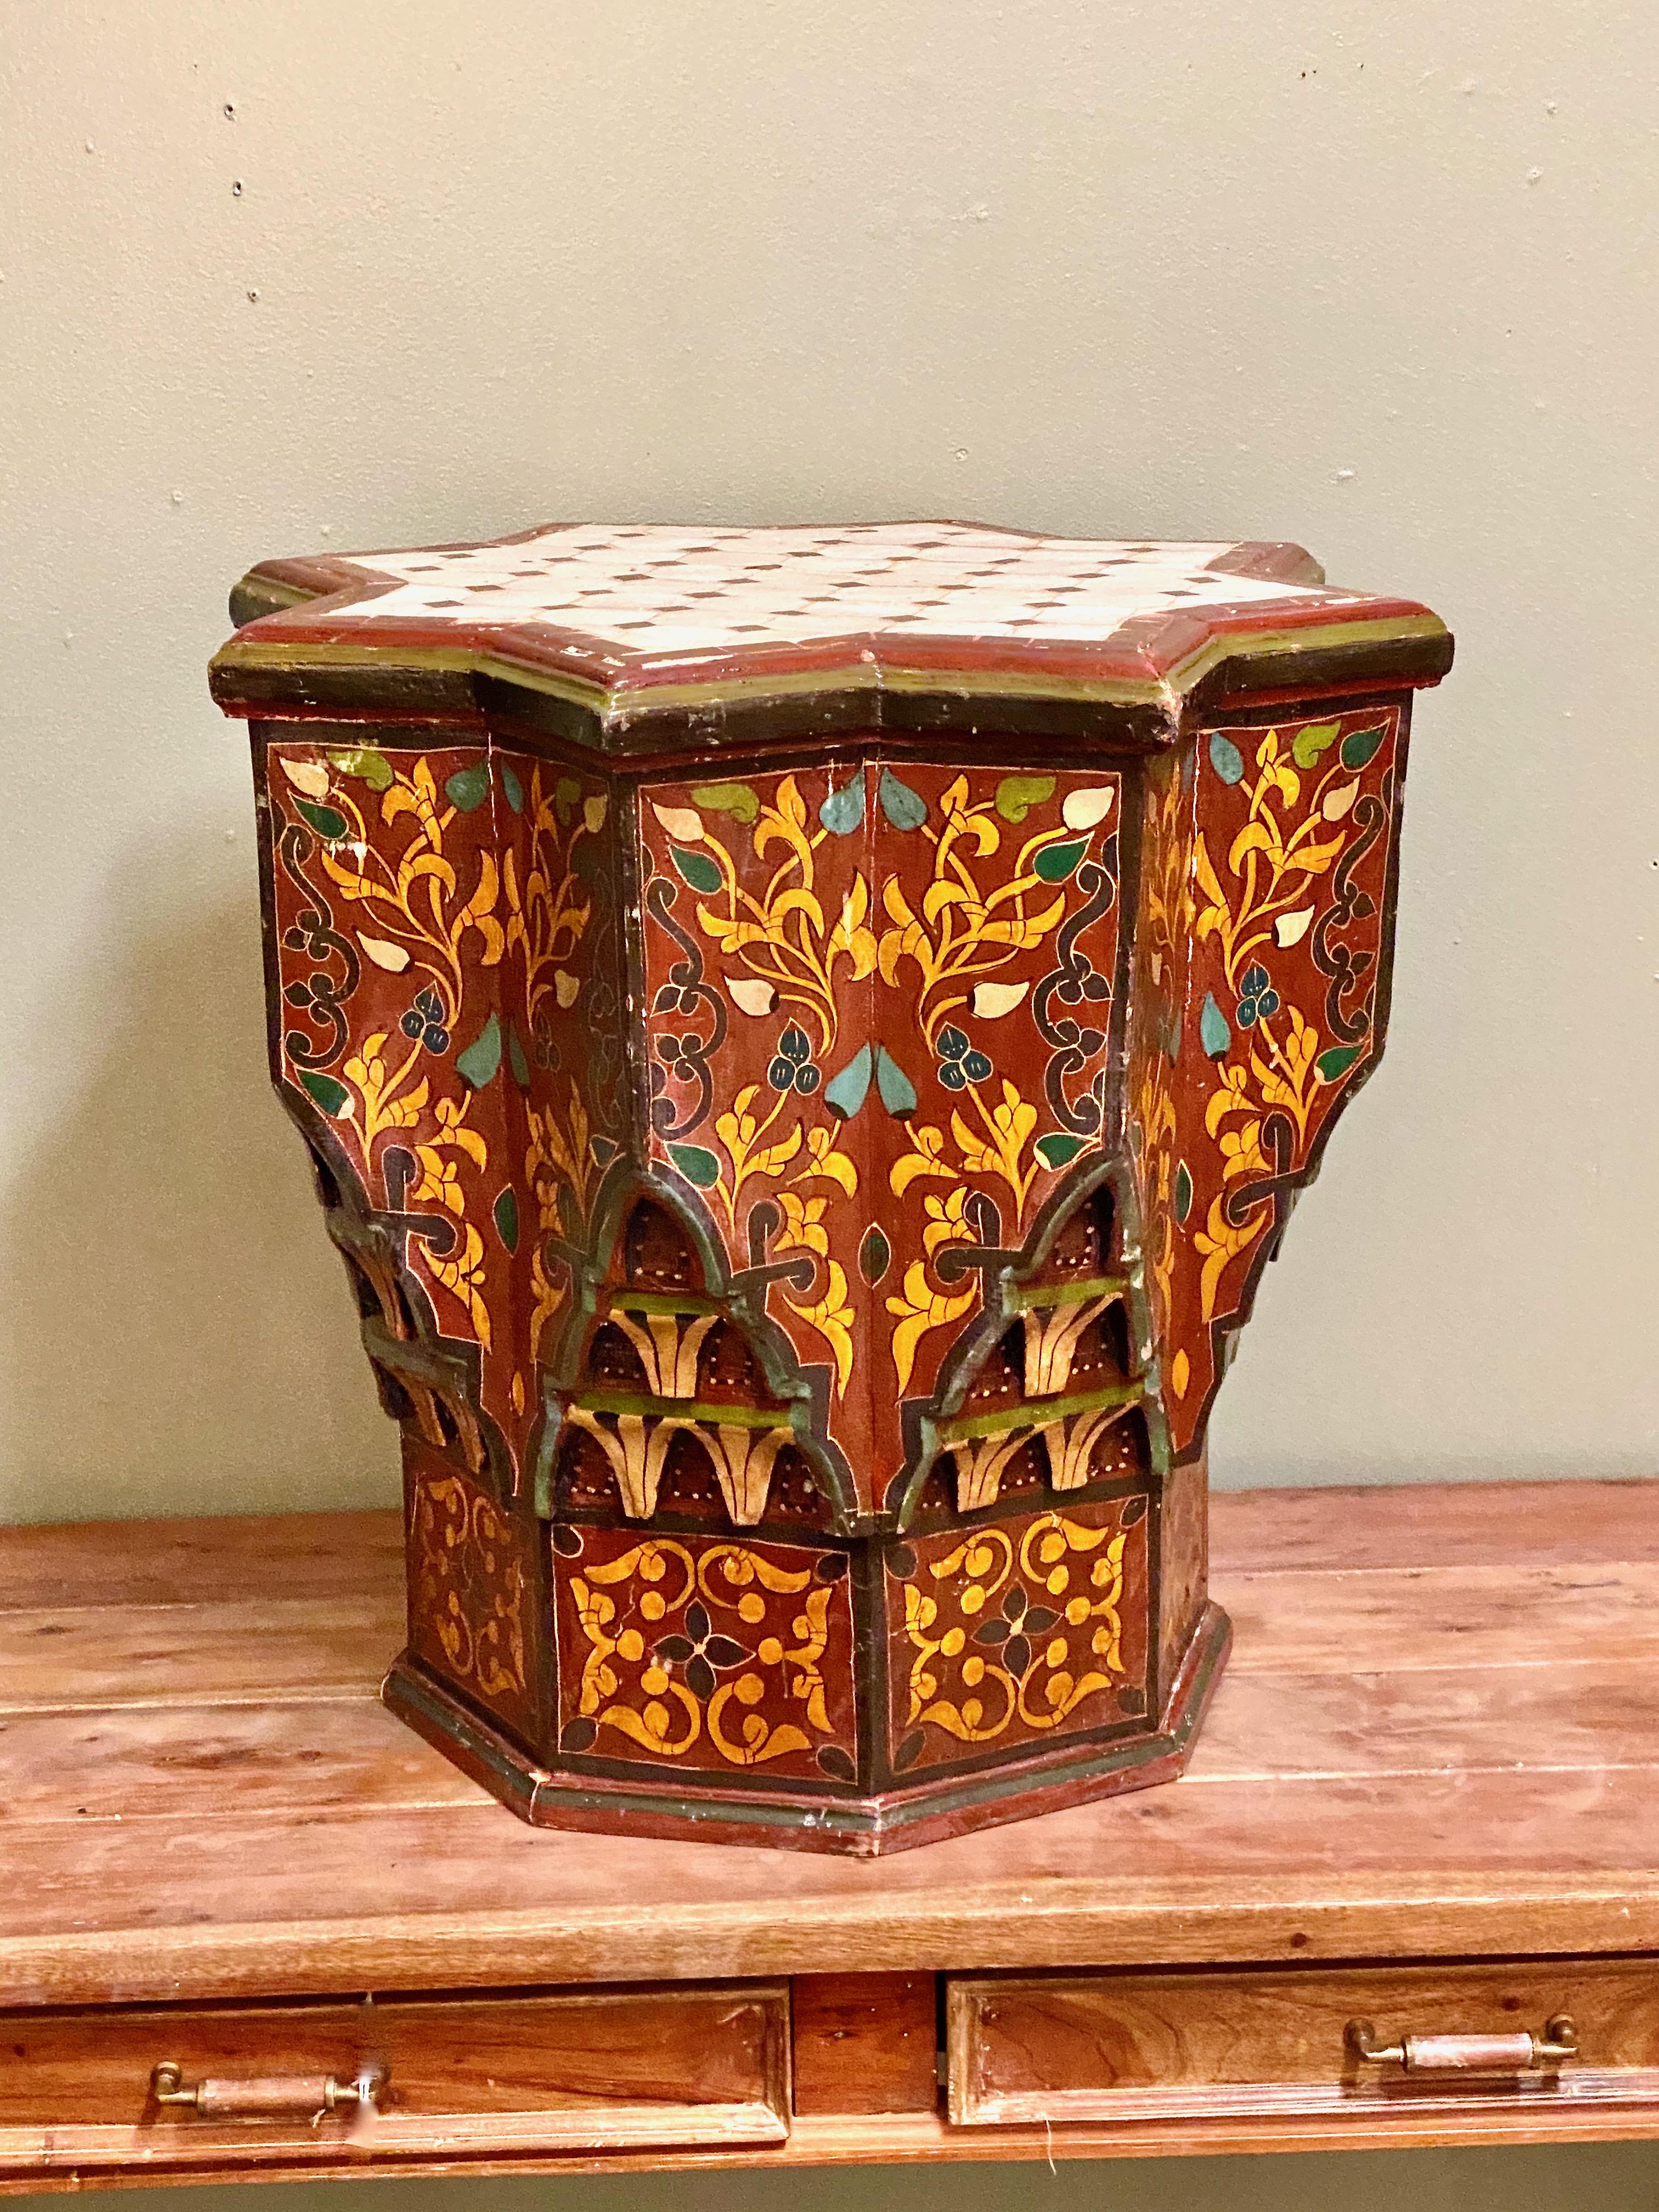 This is a very decorative Spanish star-form tile top occasional or drinks table. The table dates to the mid-20th century and is most probably from Sevilla, as indicated by its star-form structure and wonderfully painted base. This table would add a